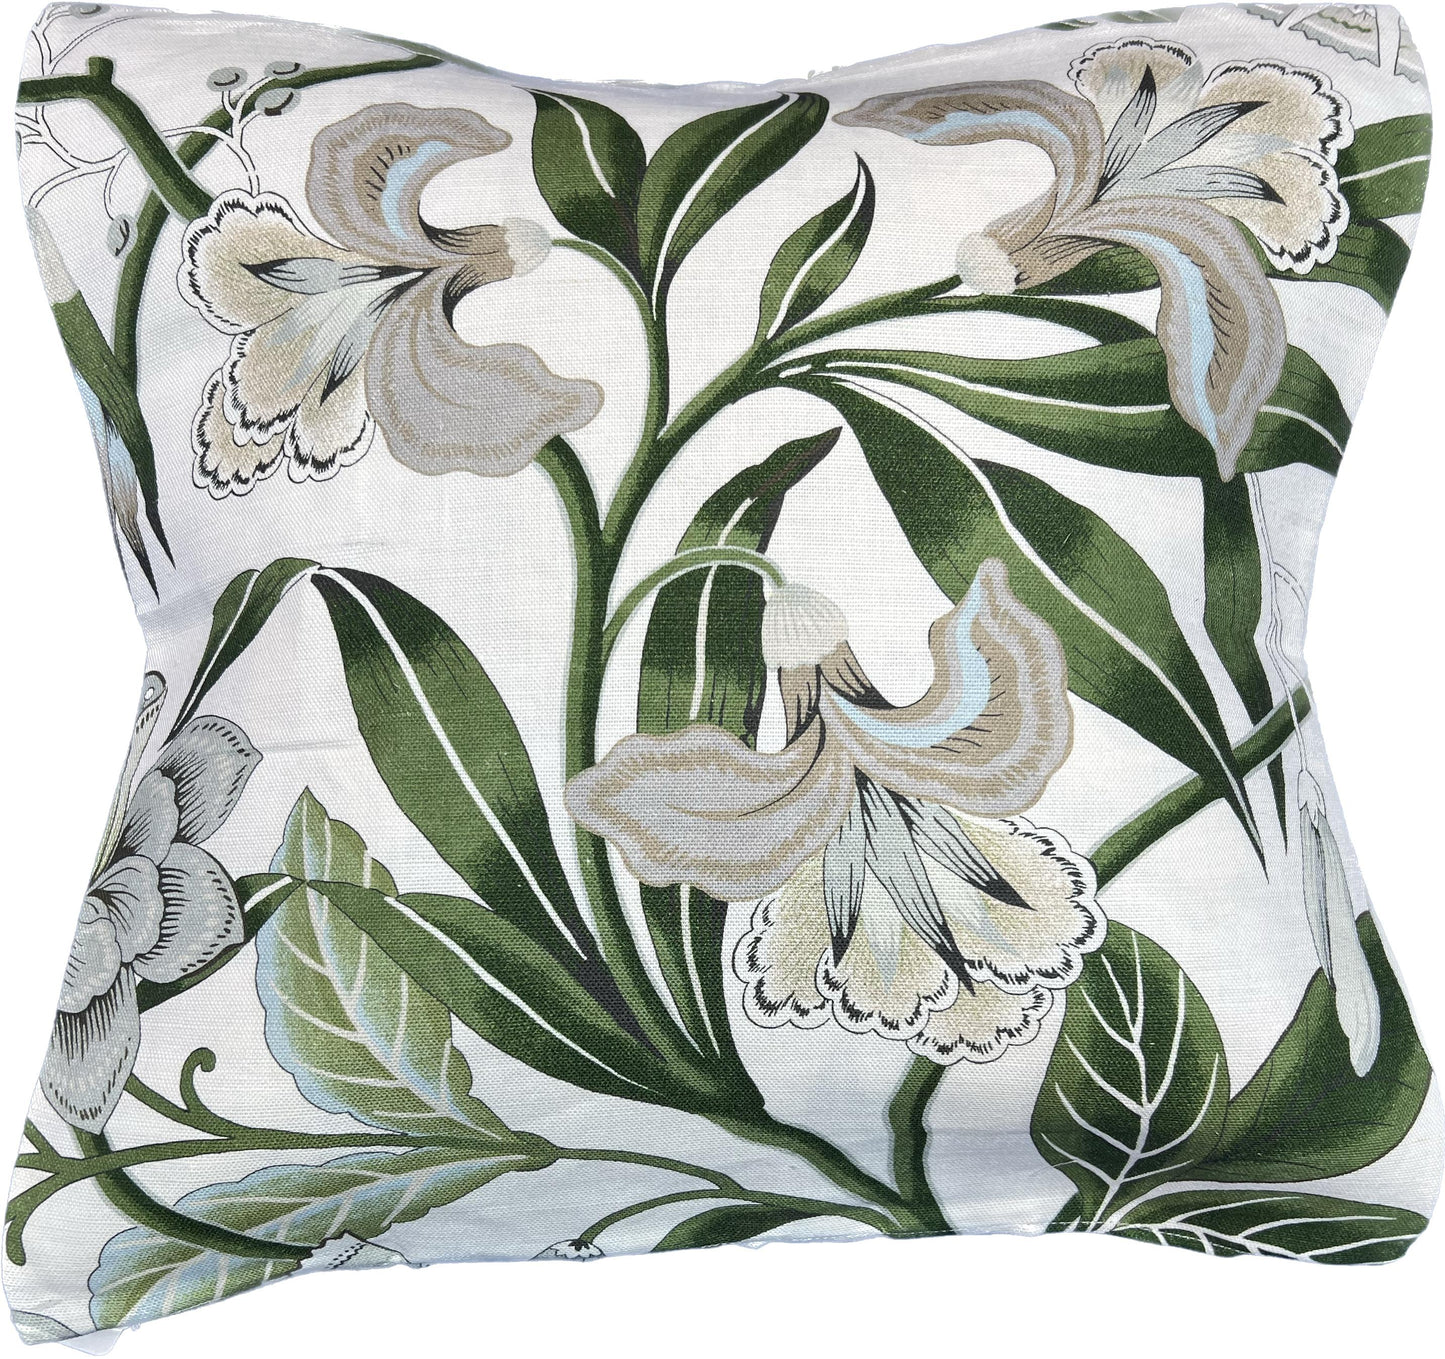 18"x18"  Floral Print Pillow Cover (Anna French: AF9622 Cleo - Green & White)